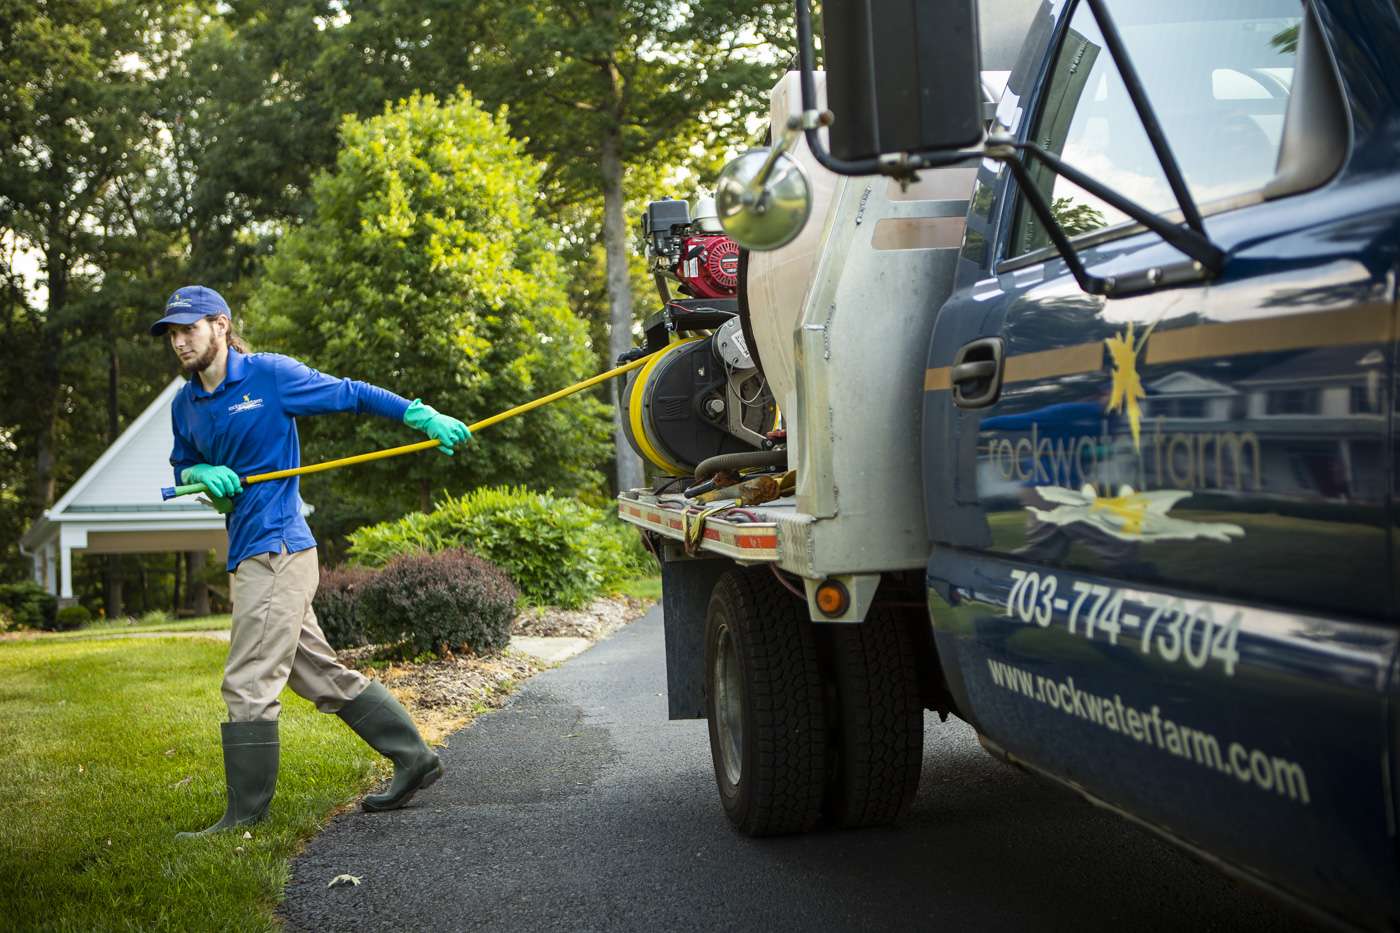 landscape care crew member pulls hose from truck to apply treatment